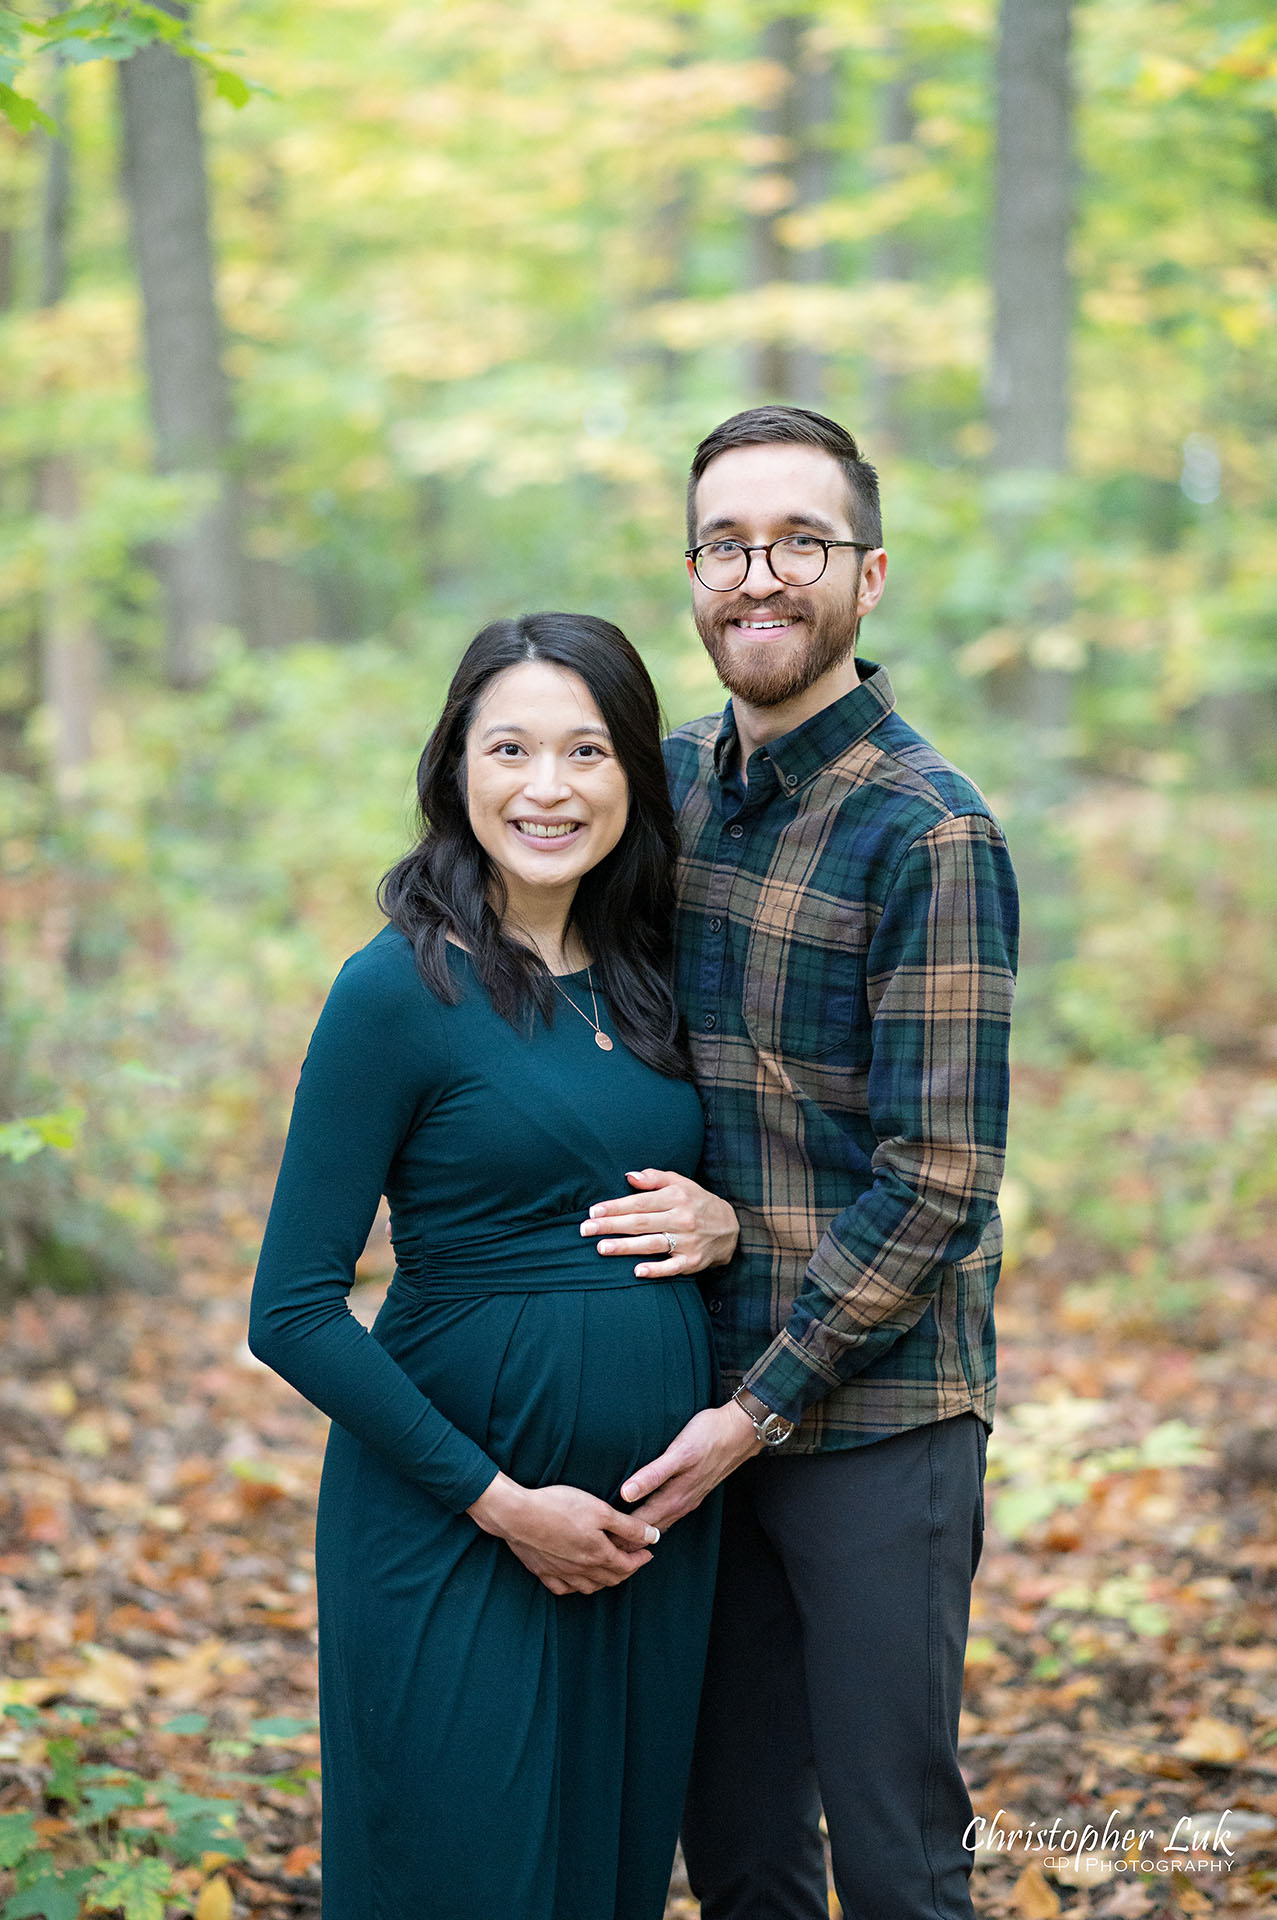 Markham Pregnancy Photos Pictures Toronto Maternity Photographer Mother Father Motherhood Fatherhood Baby Bump Candid Natural Photojournalistic Forest Trail Fall Autumn Leaves Portrait Smile